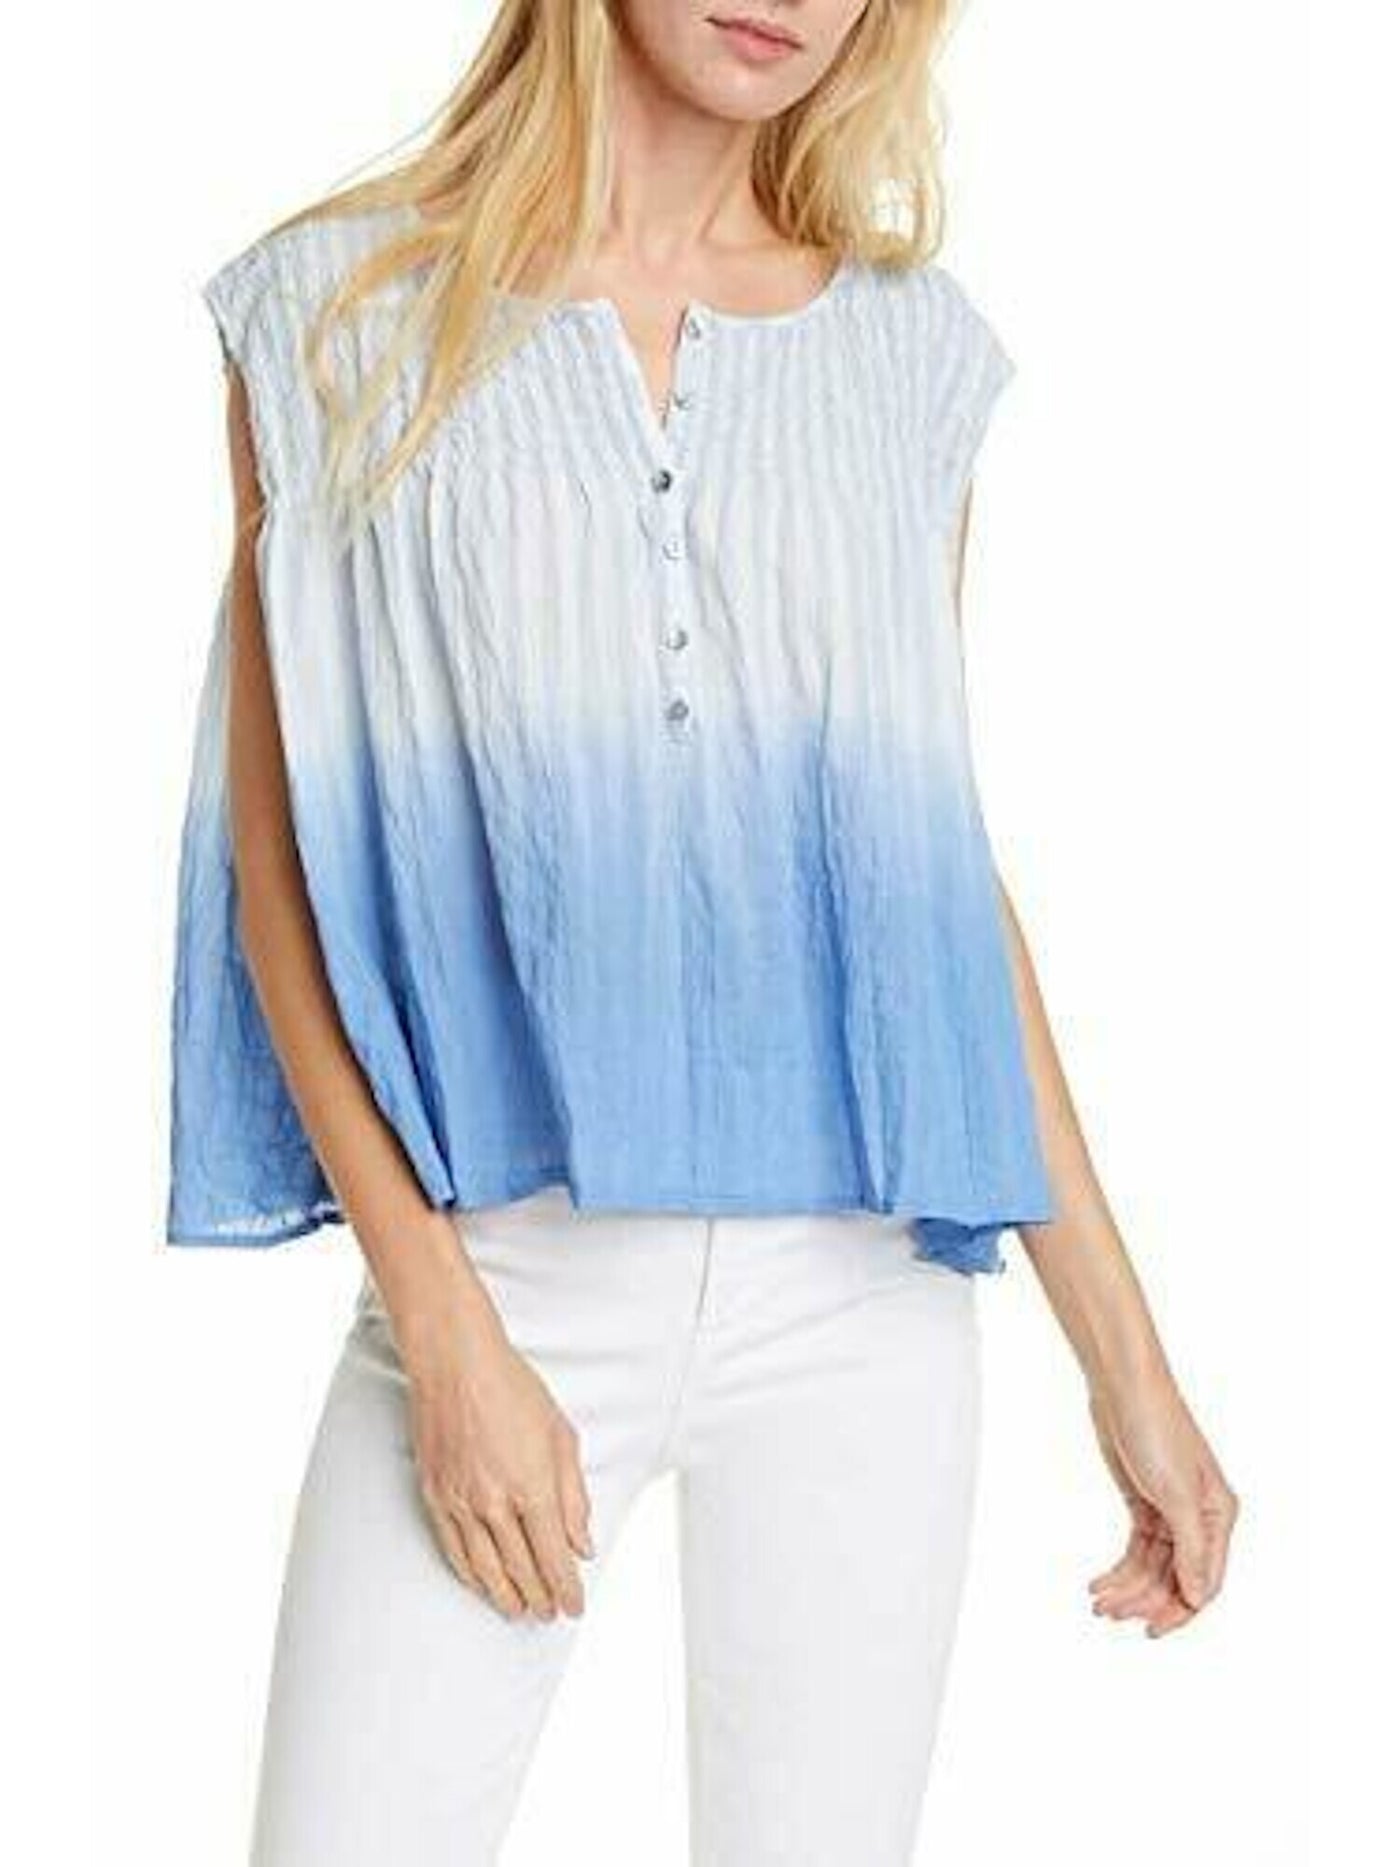 FREE PEOPLE Womens Cotton Ruffled Sleeveless Henley Peasant Top